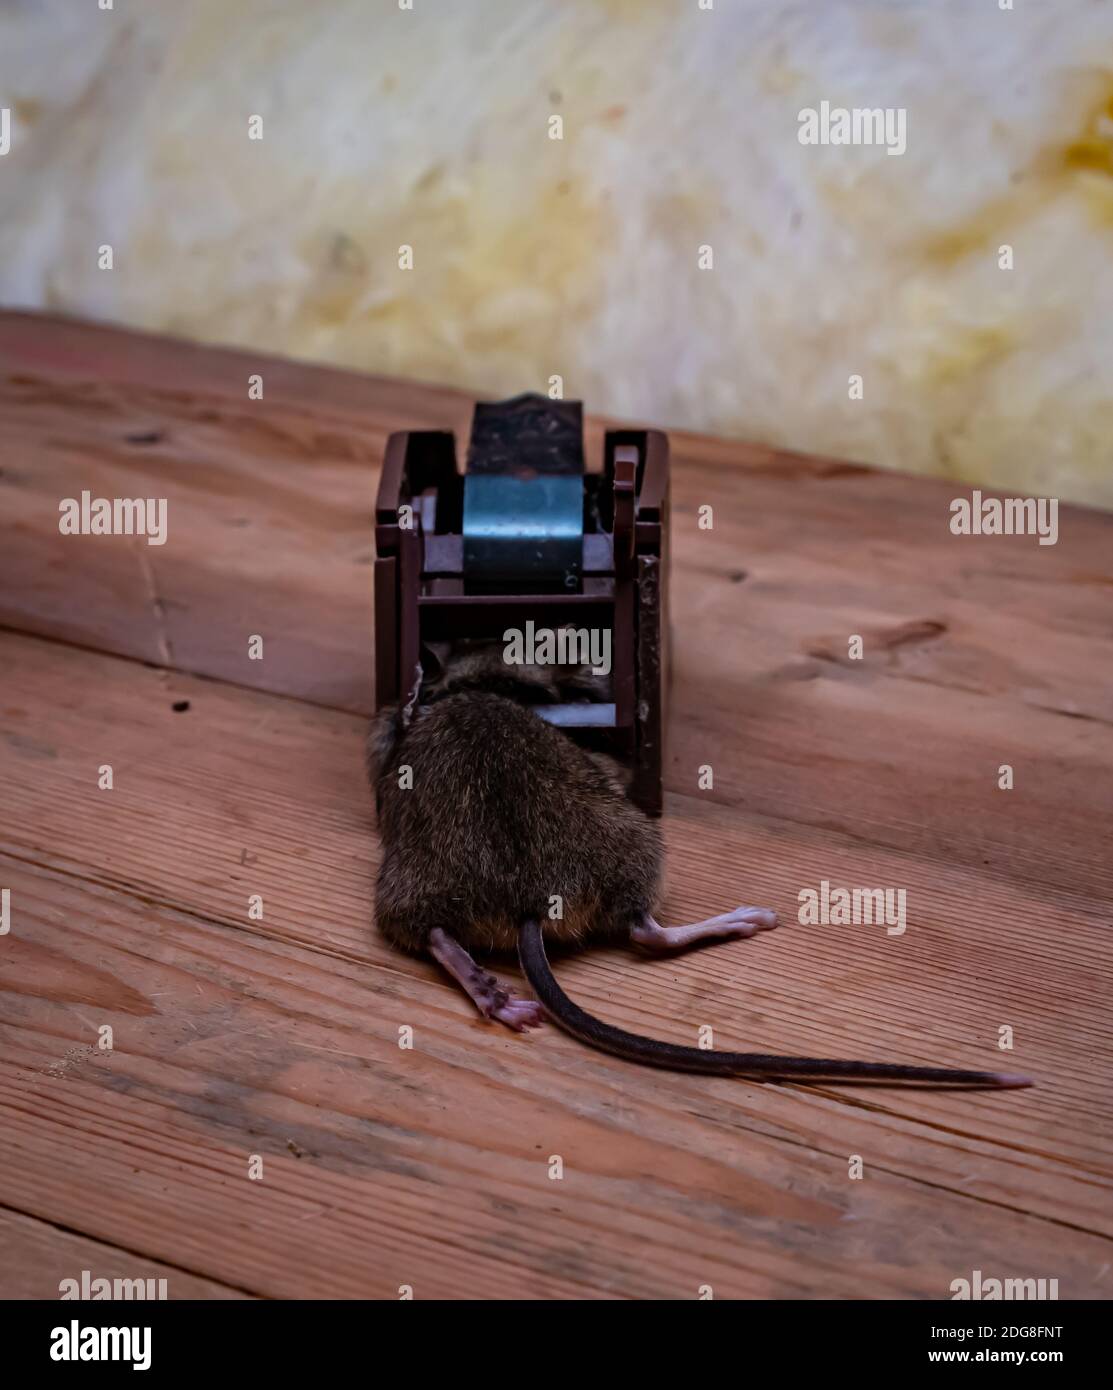 https://c8.alamy.com/comp/2DG8FNT/dead-brown-house-mouse-in-a-modern-snap-trap-with-end-and-tail-sticking-out-close-up-2DG8FNT.jpg